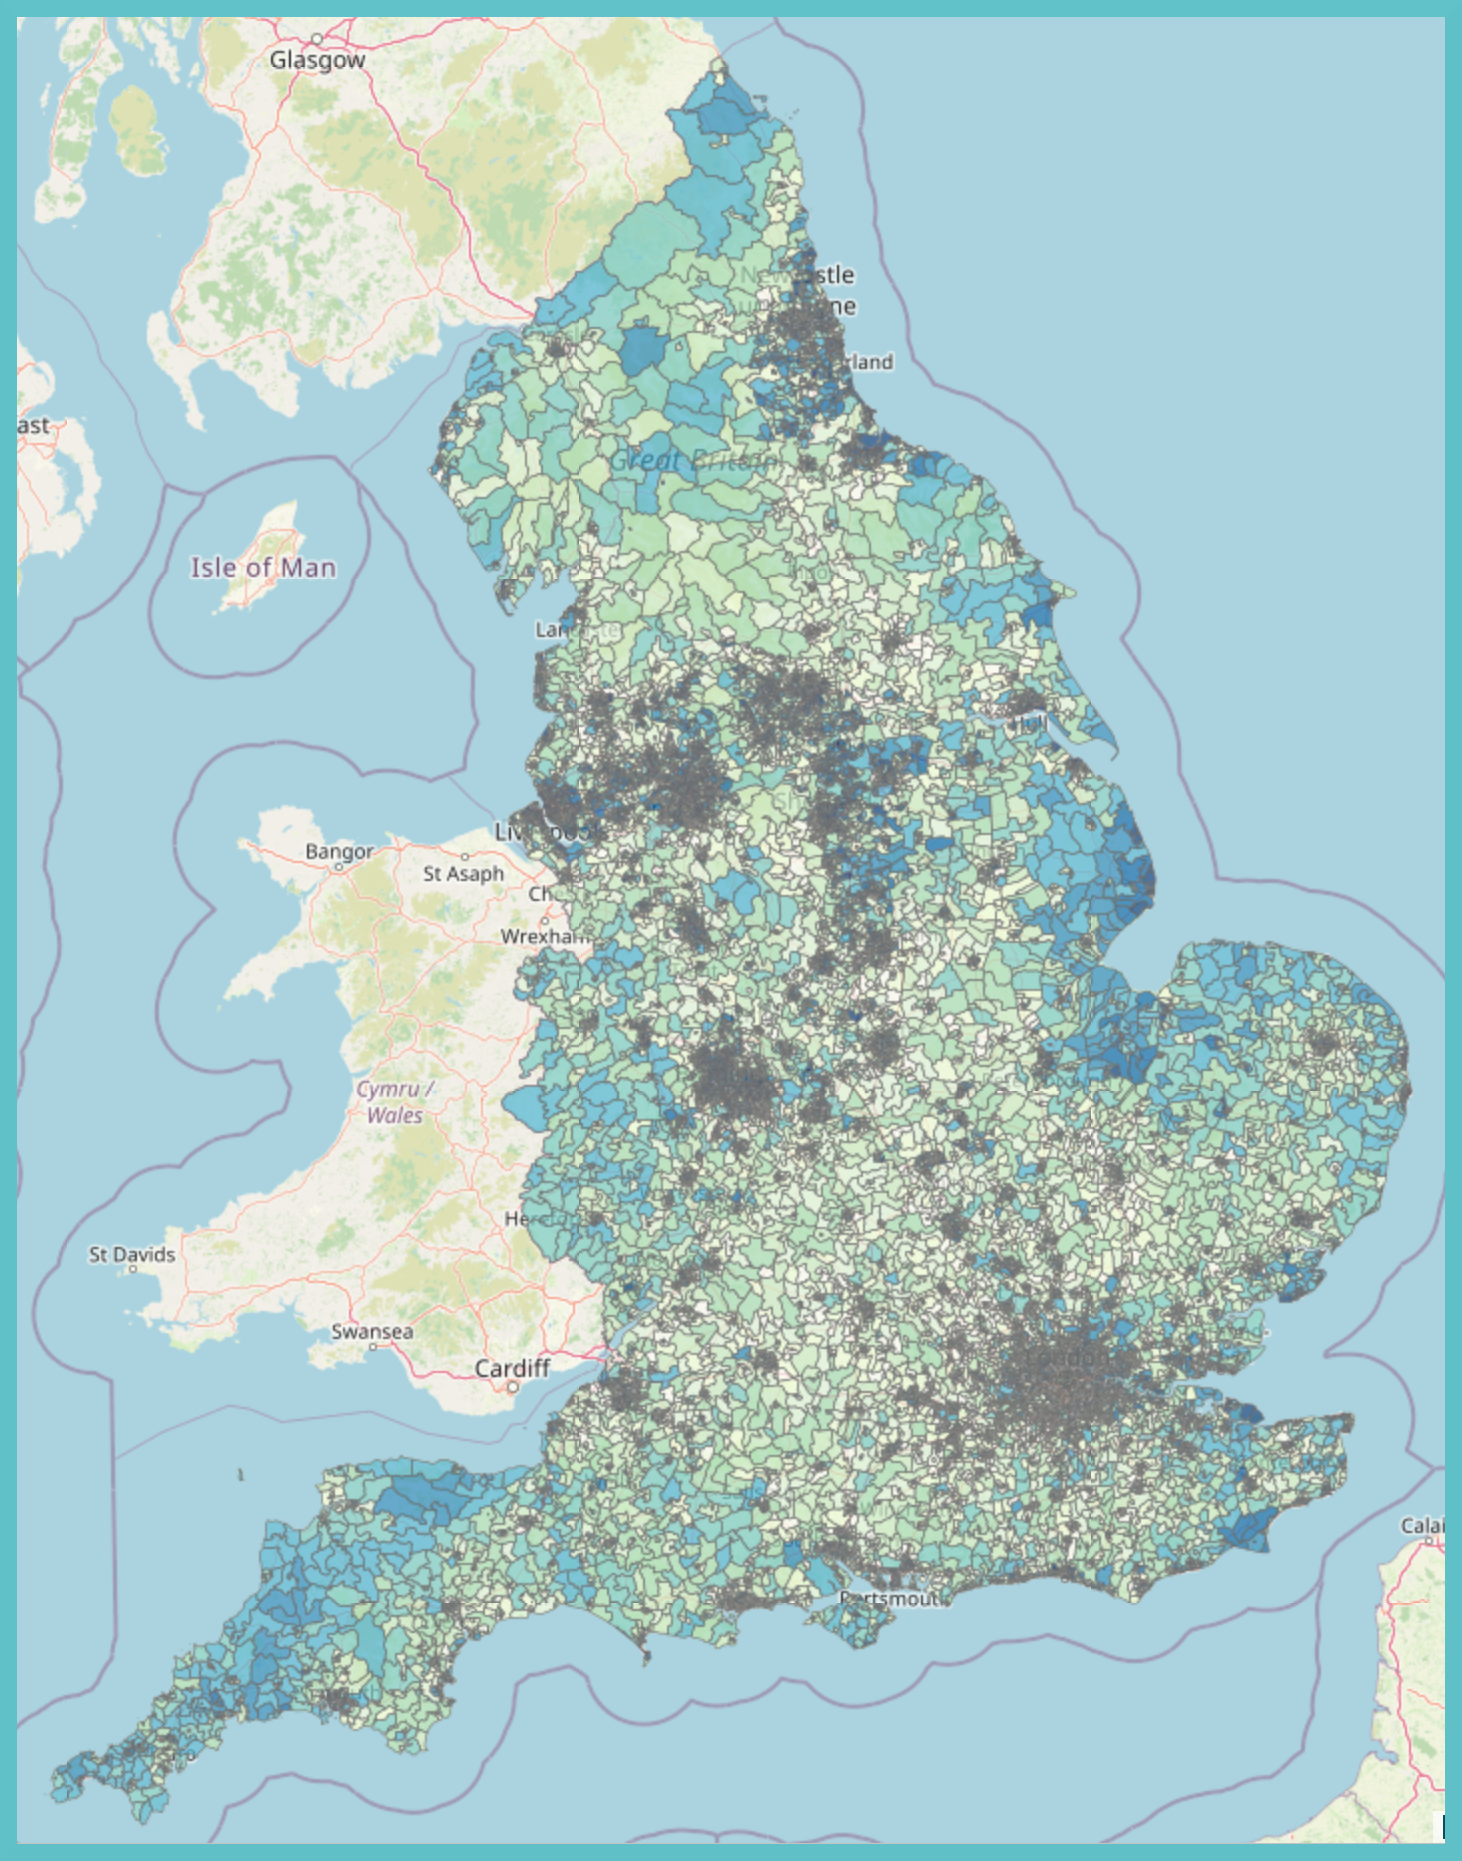 Image shows a map of the Index of Multiple Deprivation 2019 at LSOA level for England